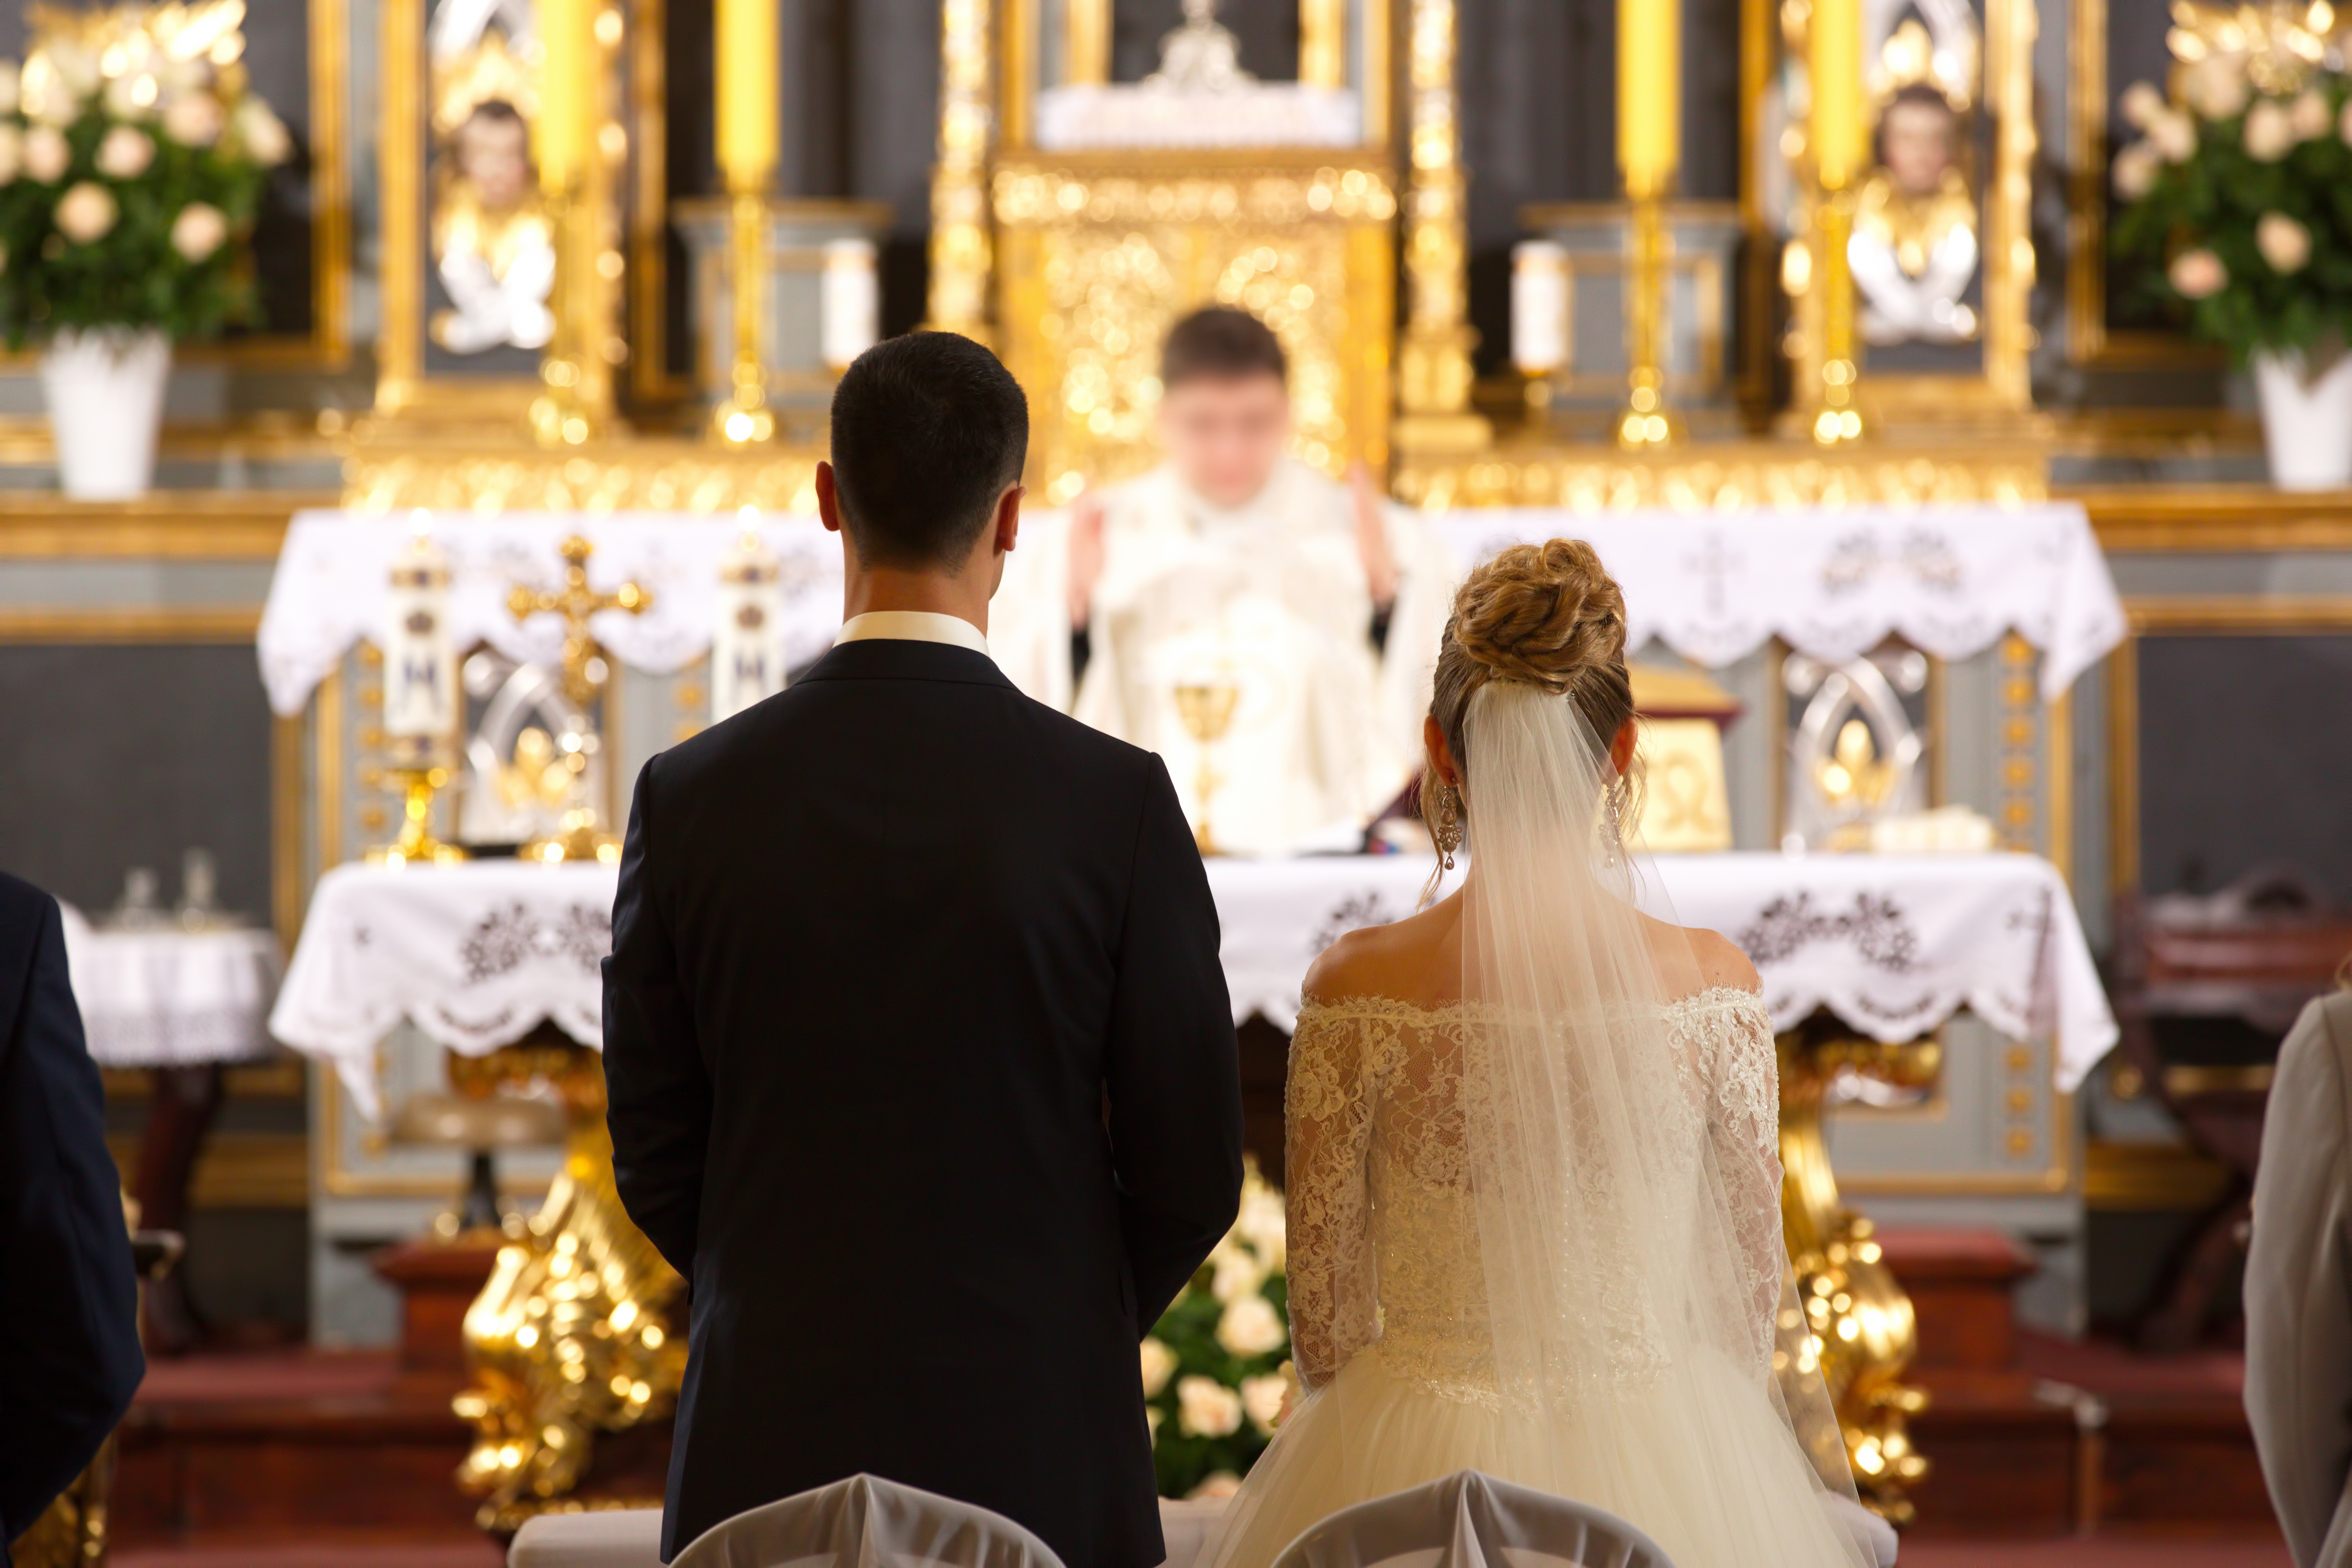 Fr. Simon Says - Wives, Submit to Your Husbands?